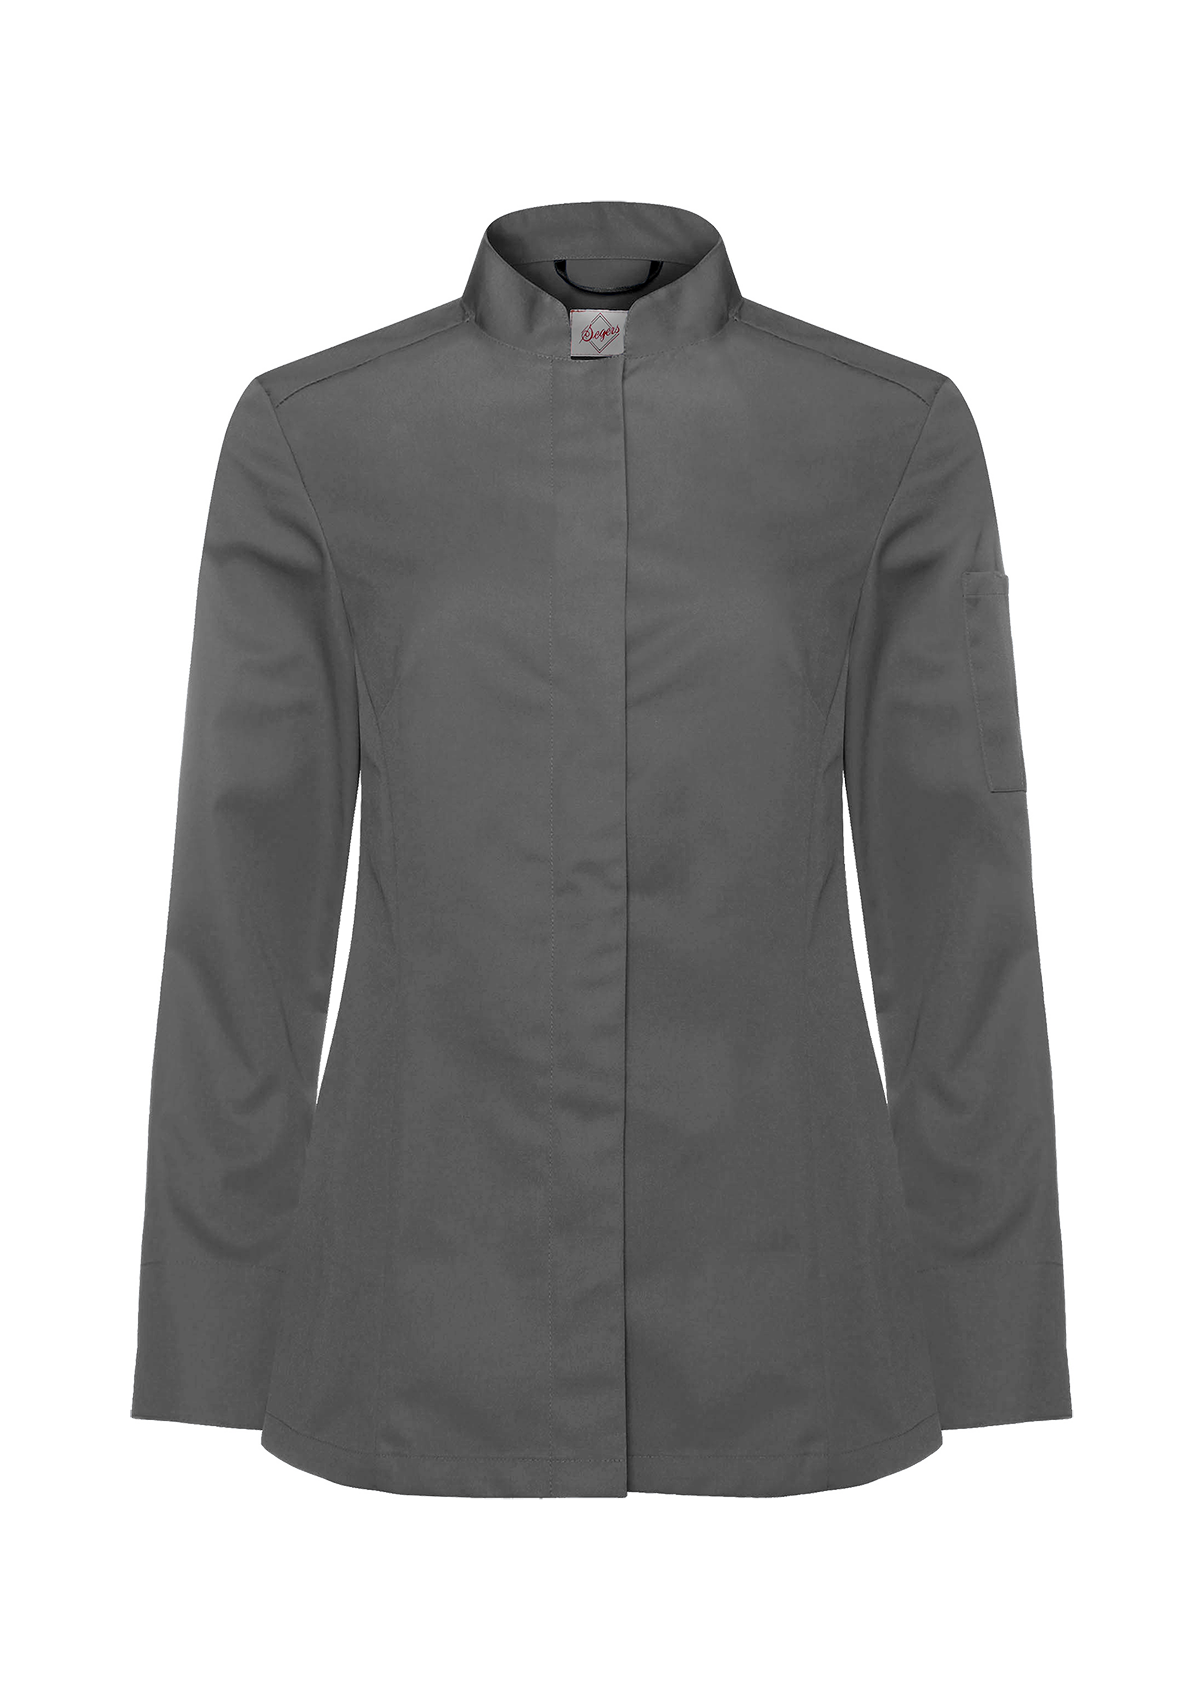 Women's Chef jacket in slim-fit with long sleeves. Segers | Cookniche